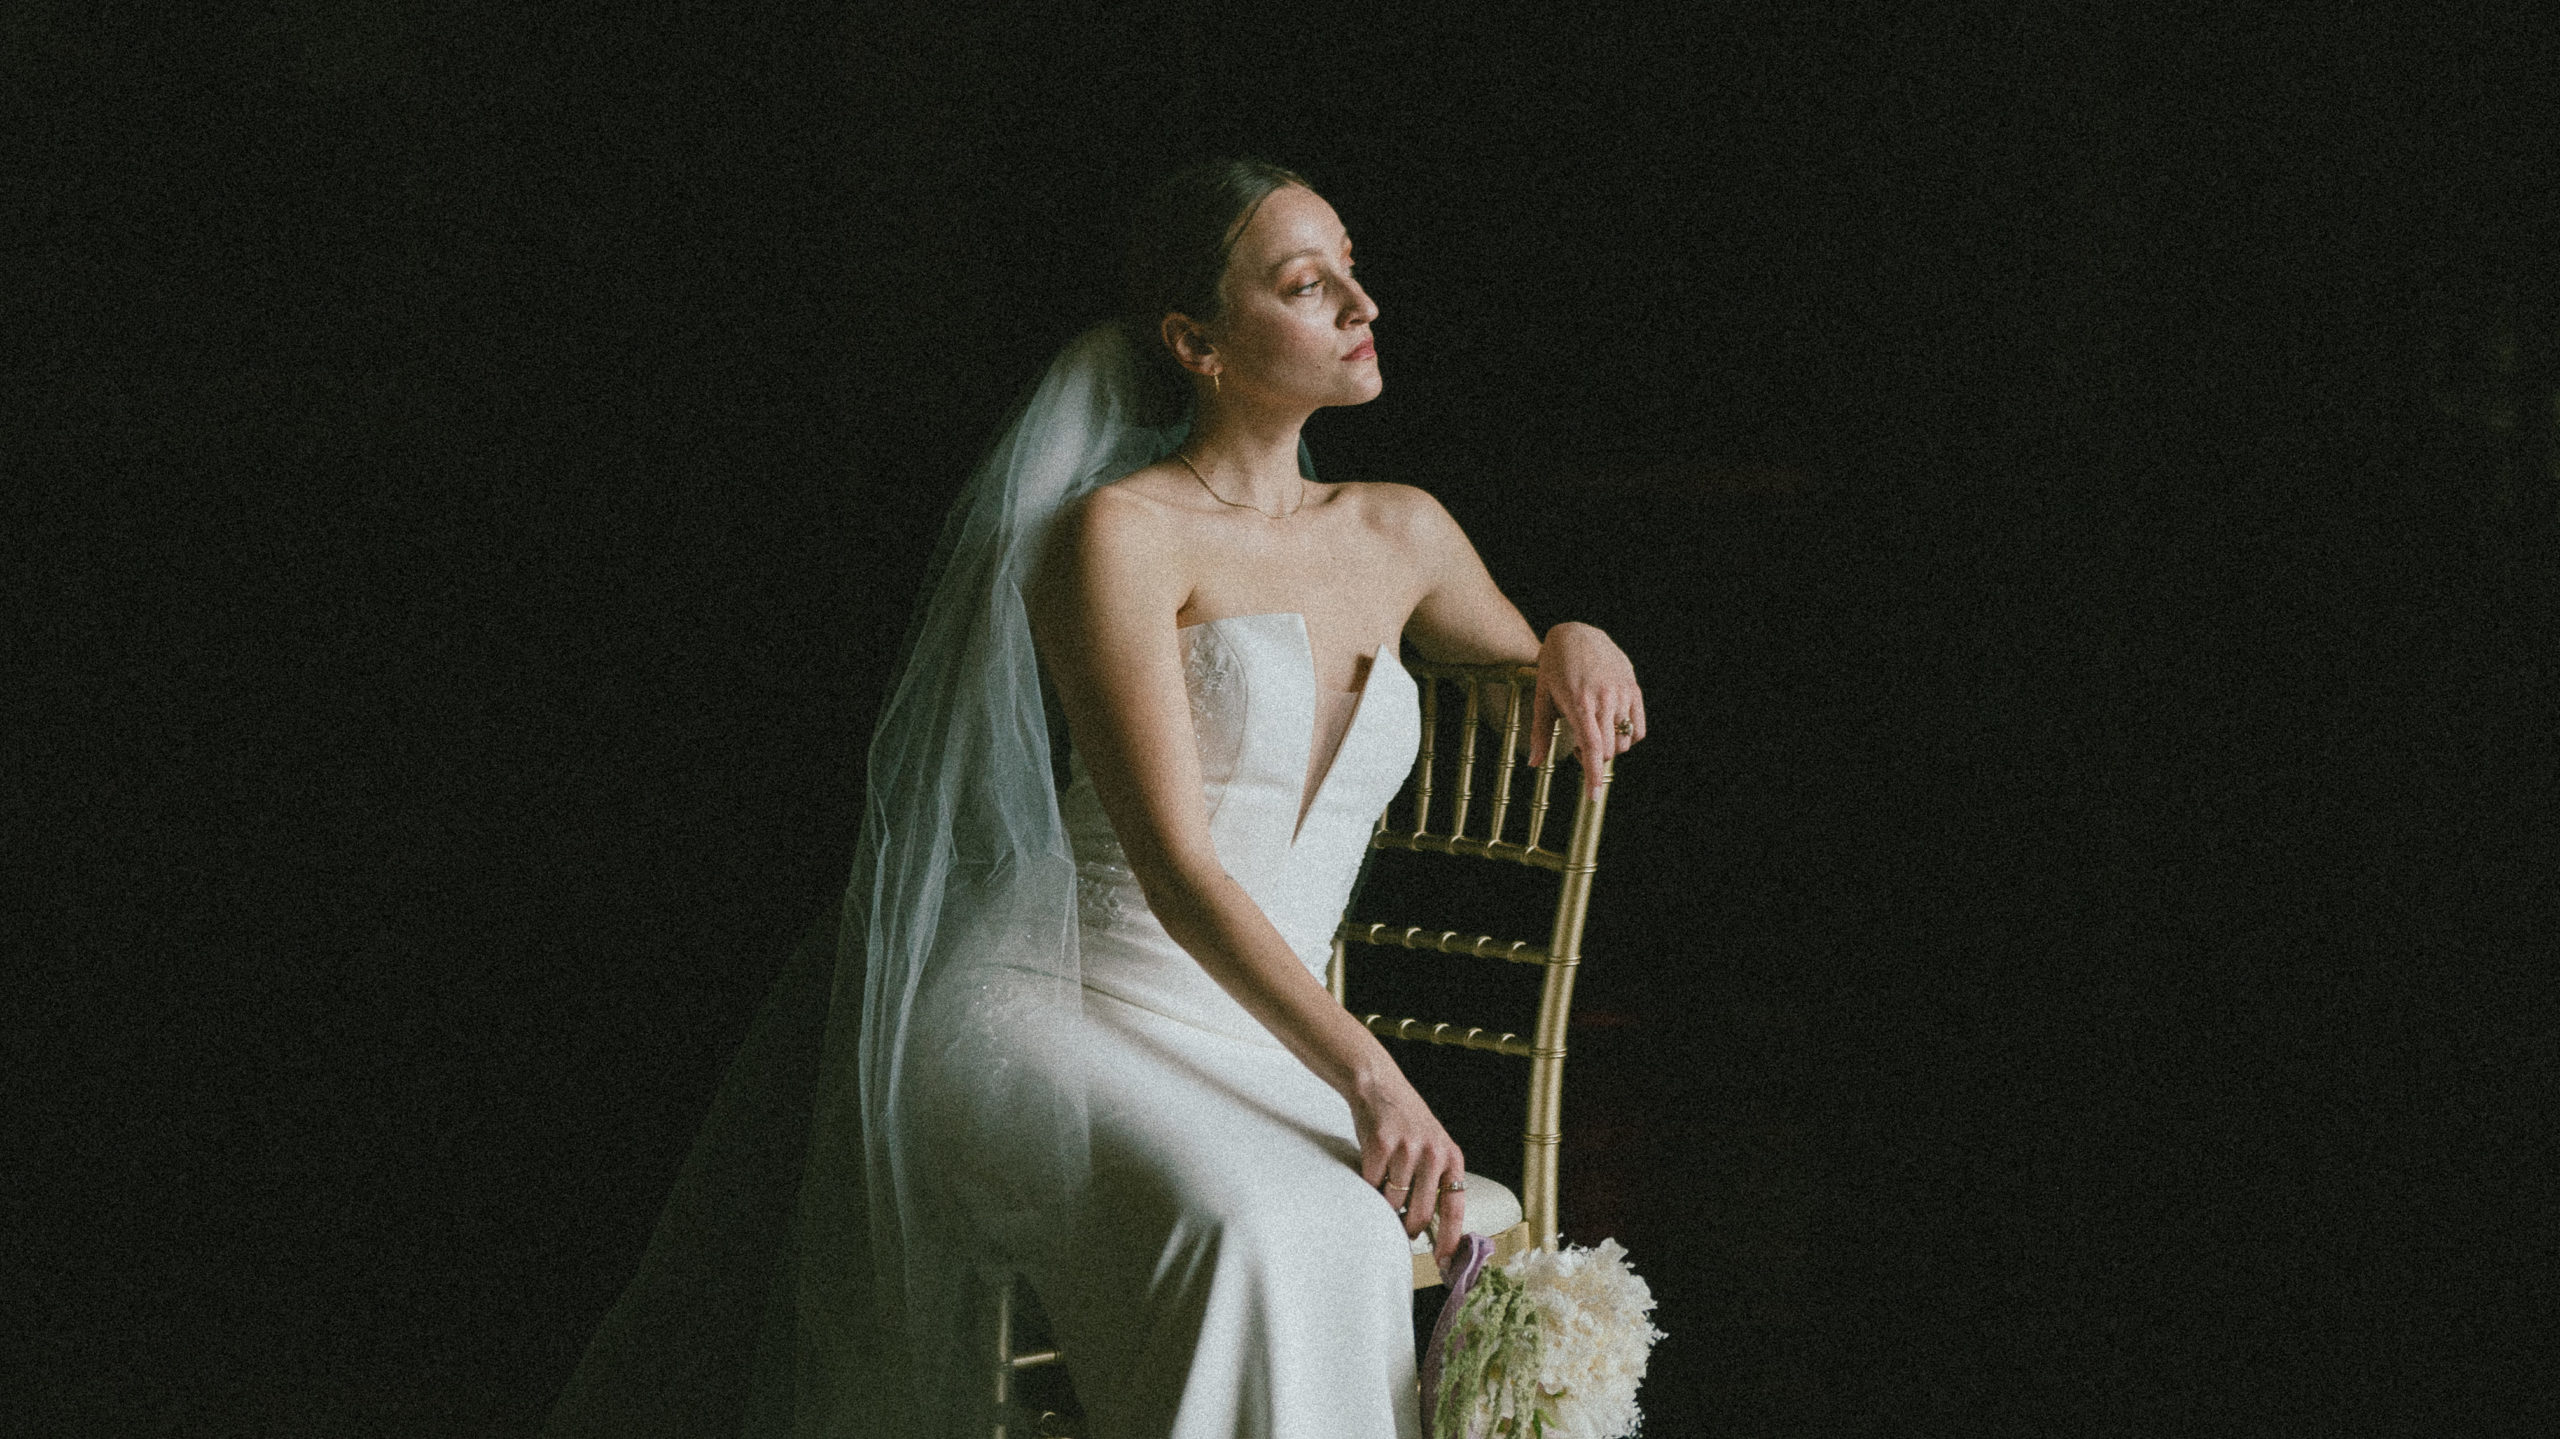 Bridal portrait of a woman sitting in a chair looking off into the distance wearing a strapless gown and a long veil